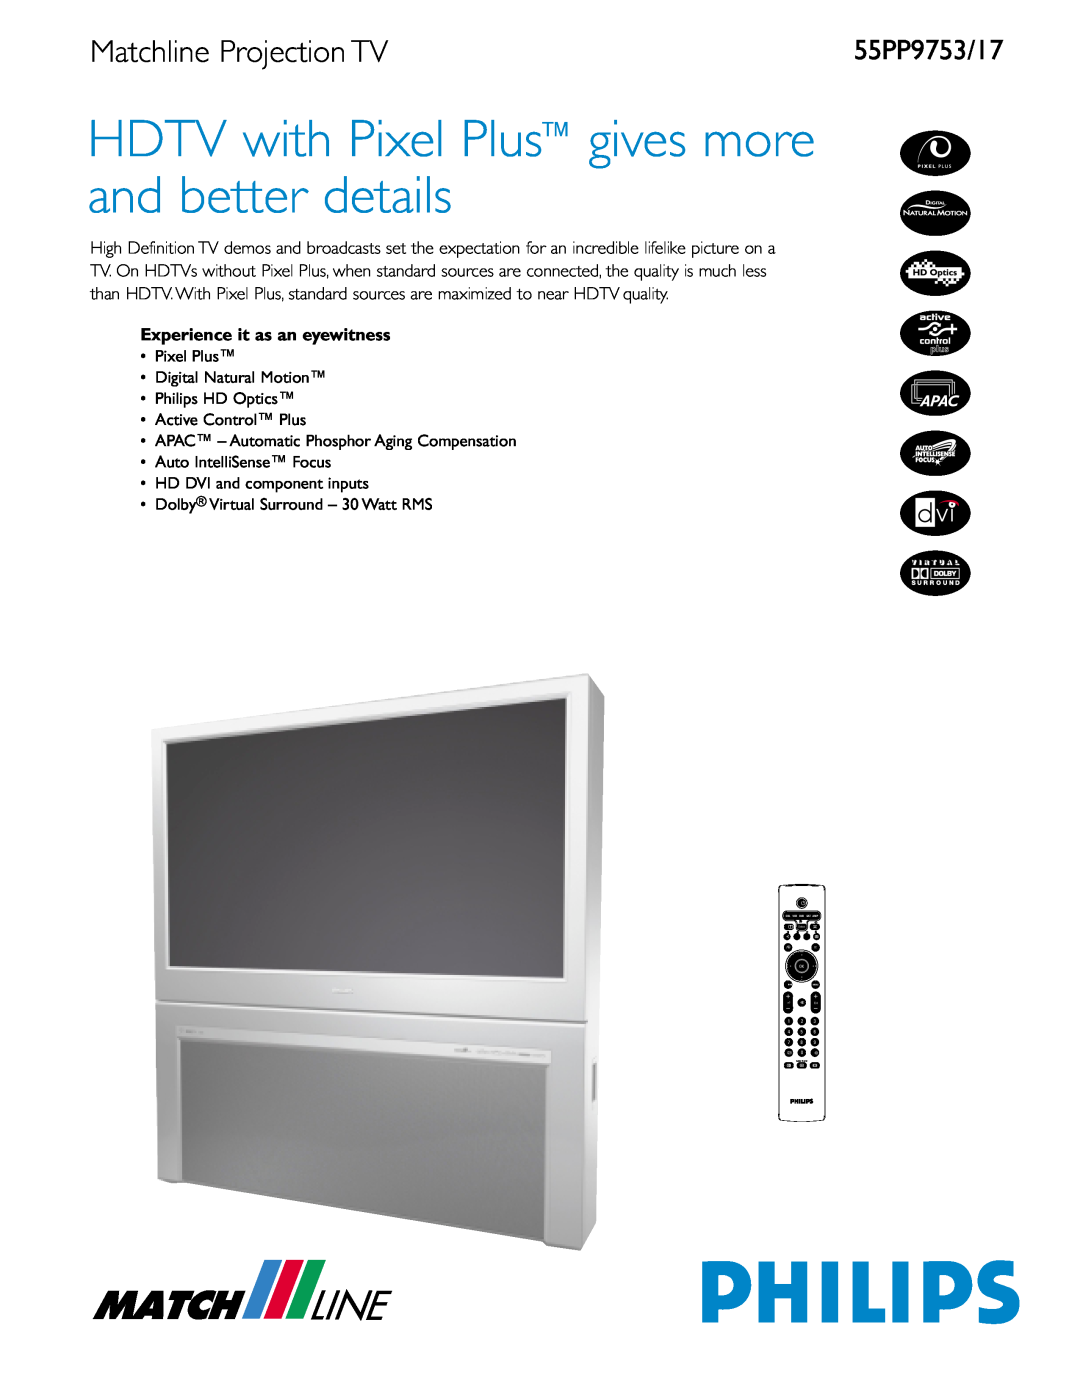 Philips 55PP9717 manual Matchline Projection TV, 55PP9753/17, Experience it as an eyewitness 